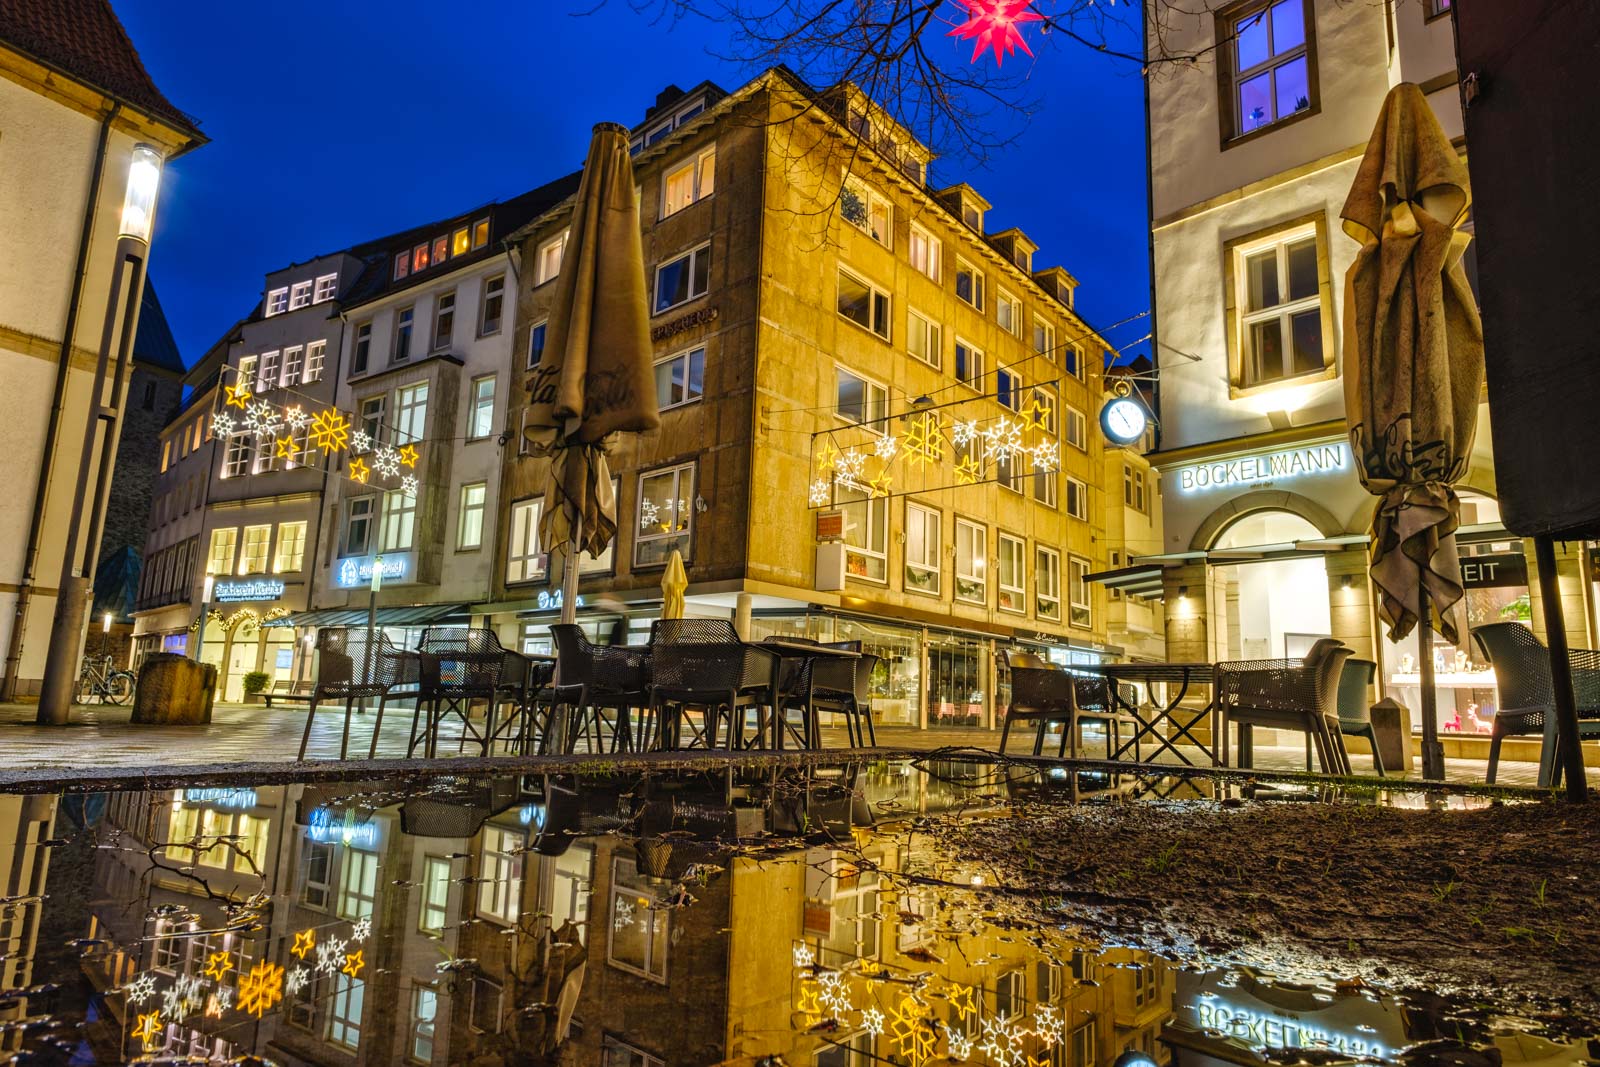 Christmas season at the 'Alter Markt' in the old town of Bielefeld in December 2020 (Germany).